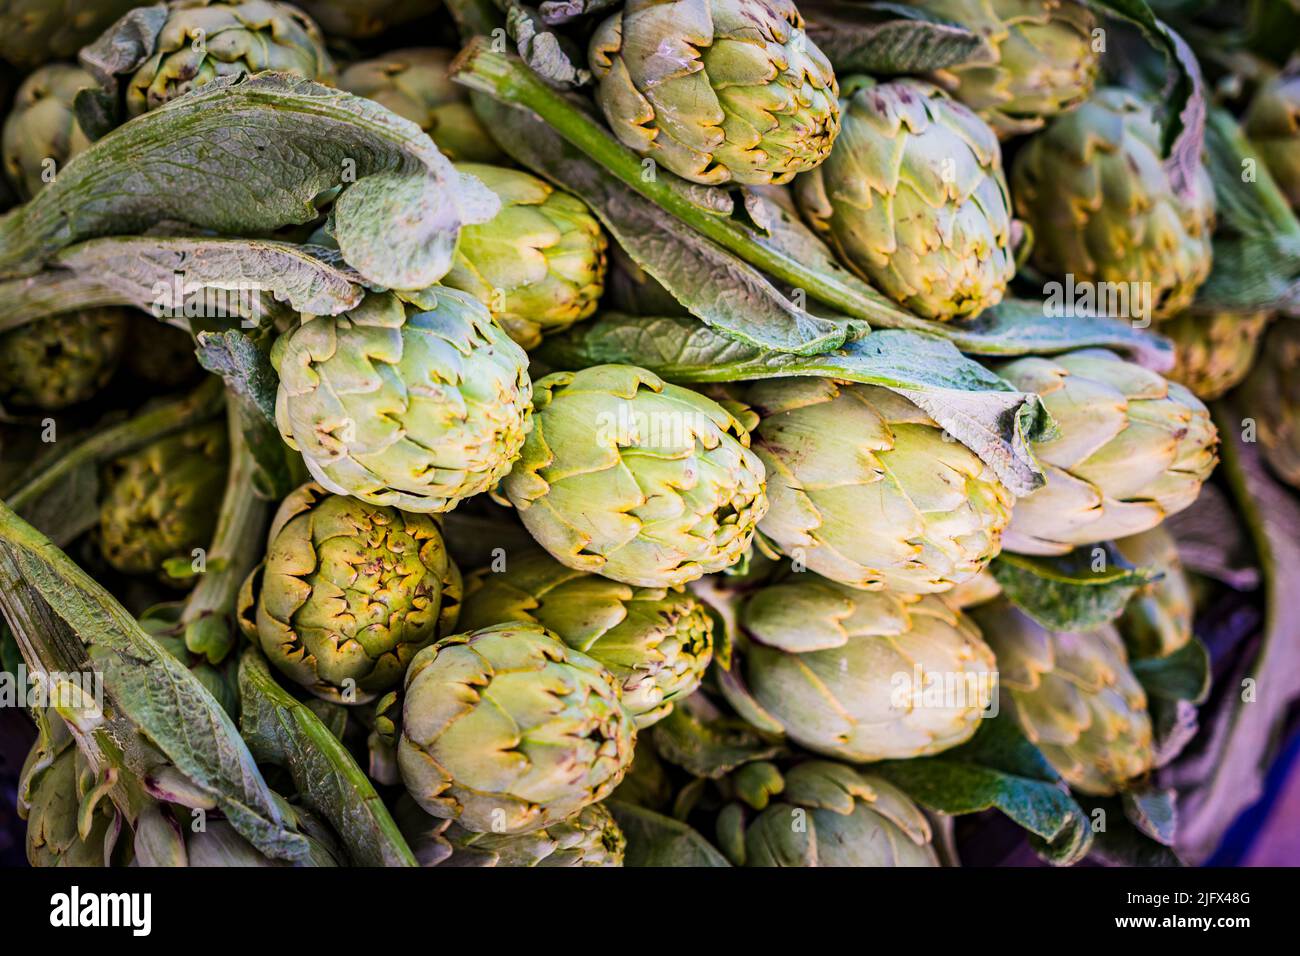 Artichokes. The globe artichoke also known by the names French artichoke and green artichoke in the U.S.,is a variety of a species of thistle cultivat Stock Photo